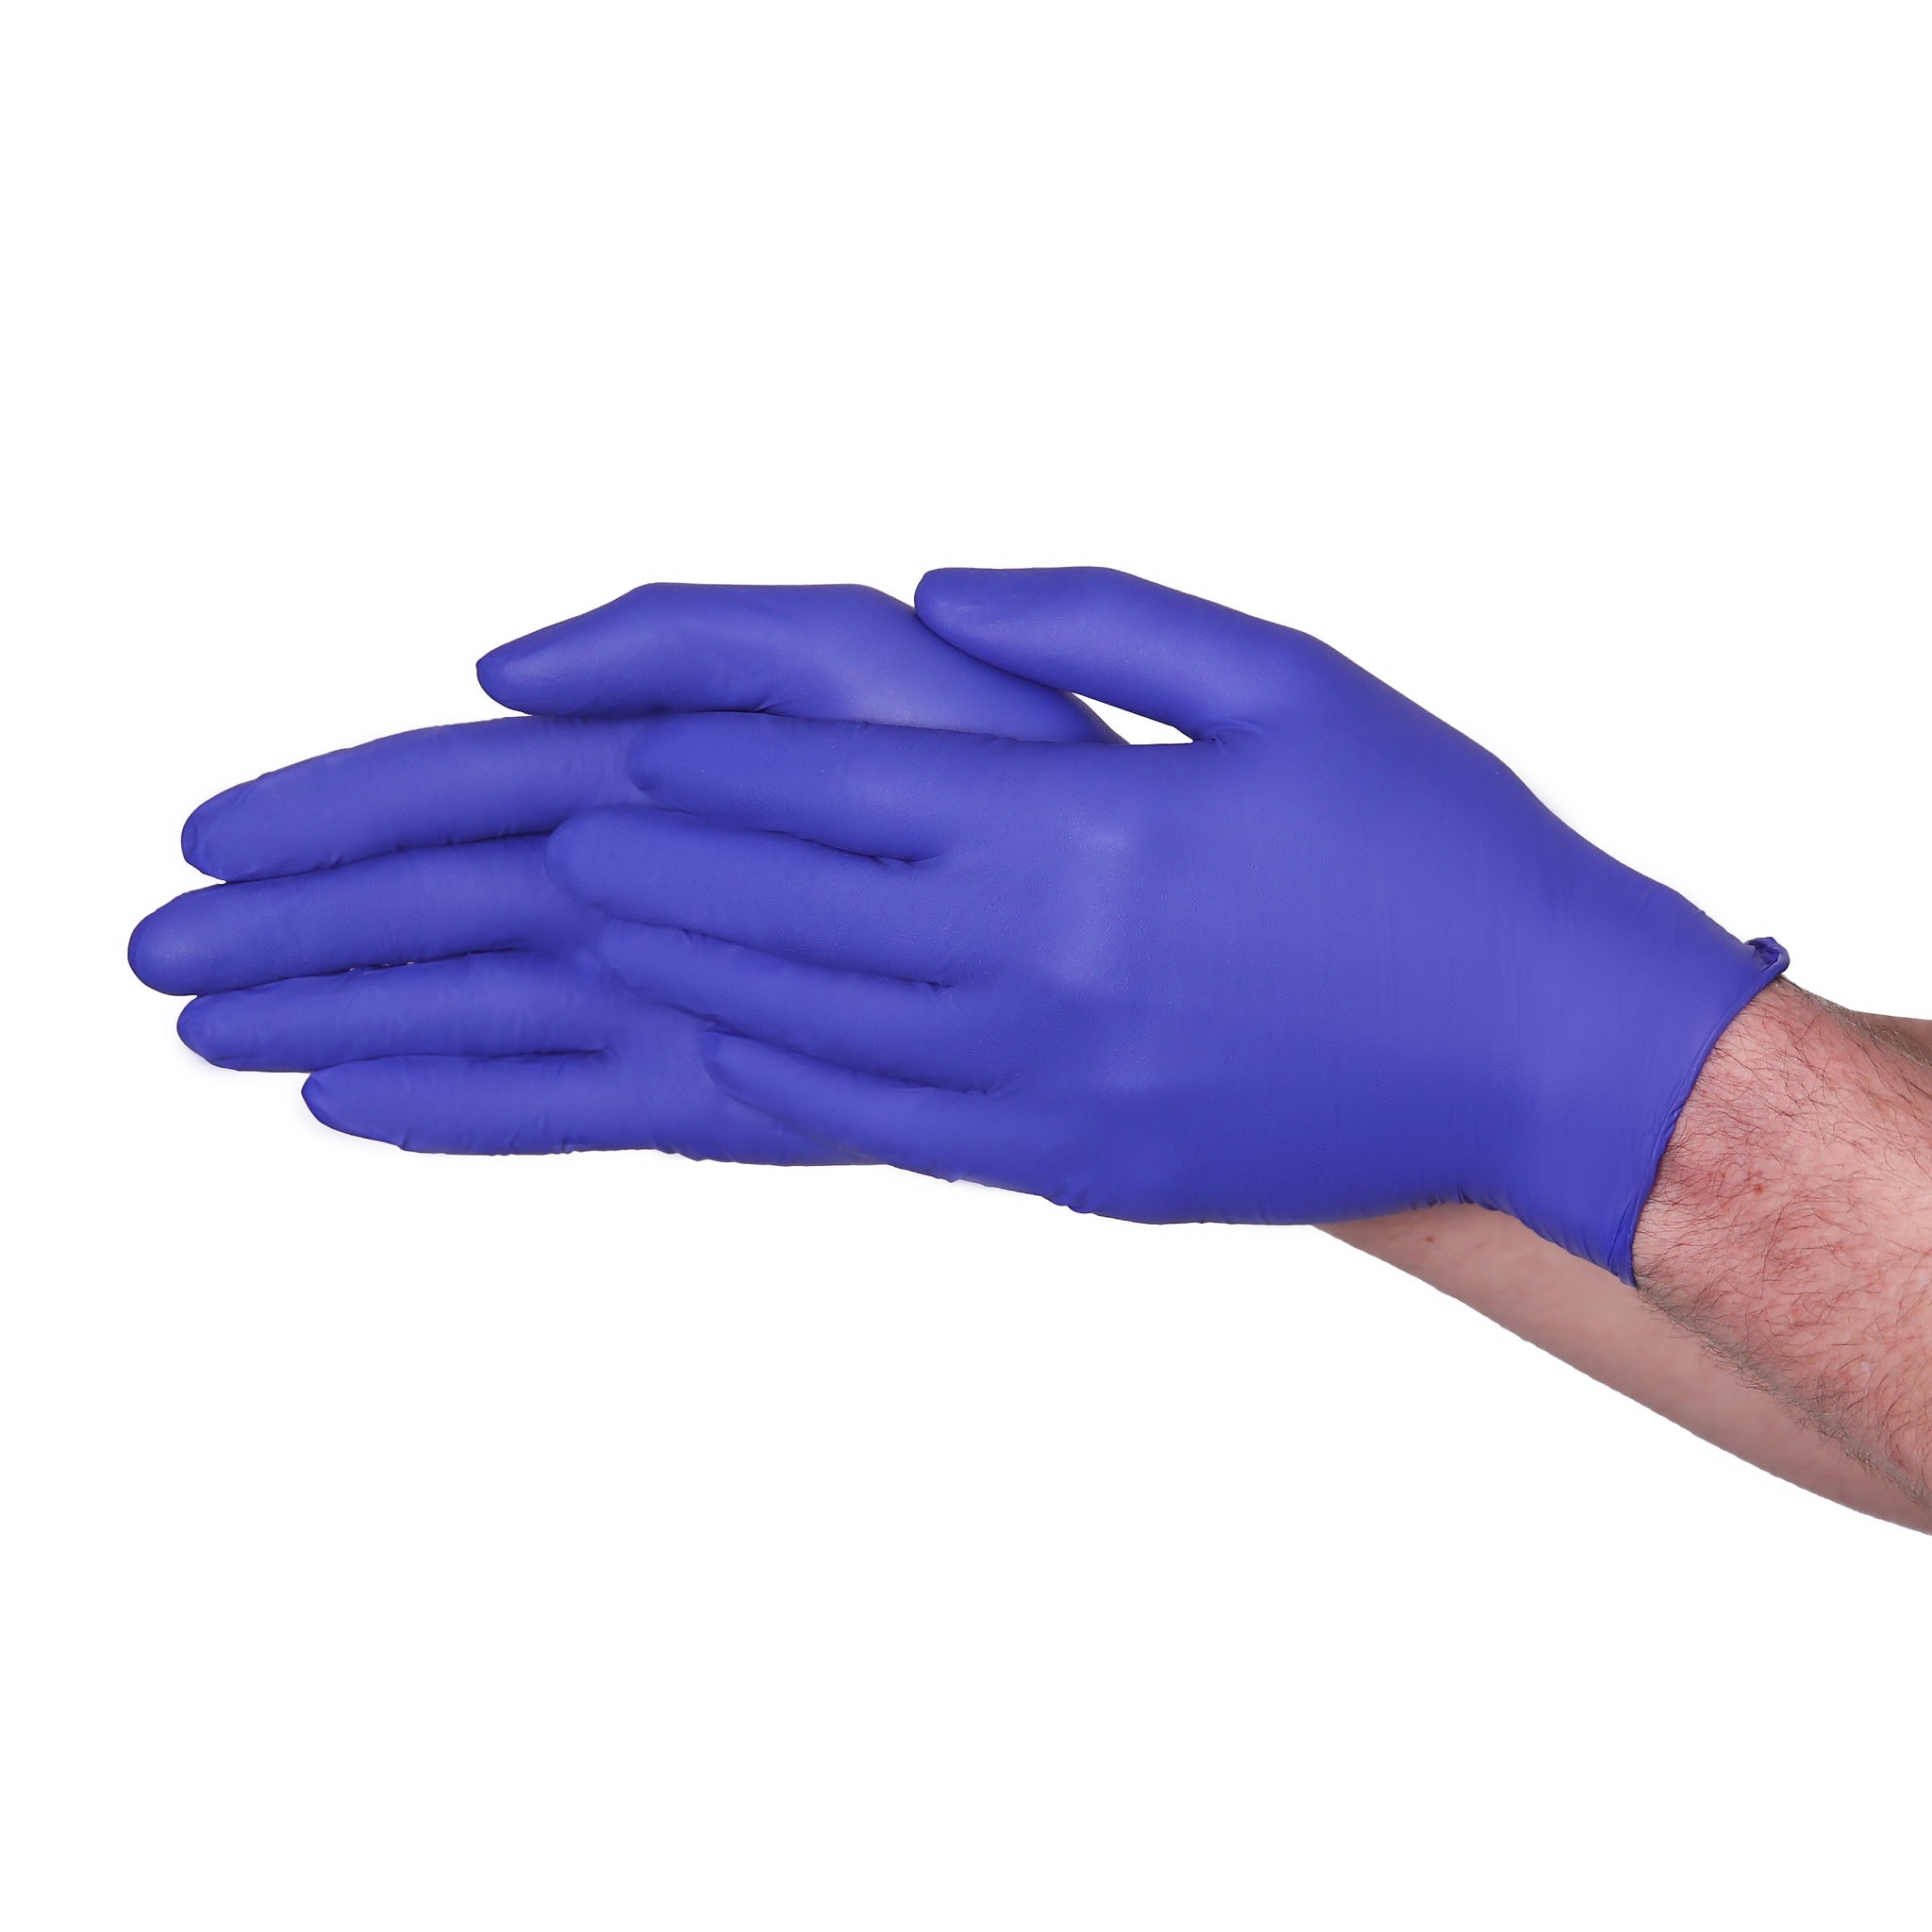 A16A1 Cobalt Blue 5 mil Nitrile Chemo Exam Disposable Gloves